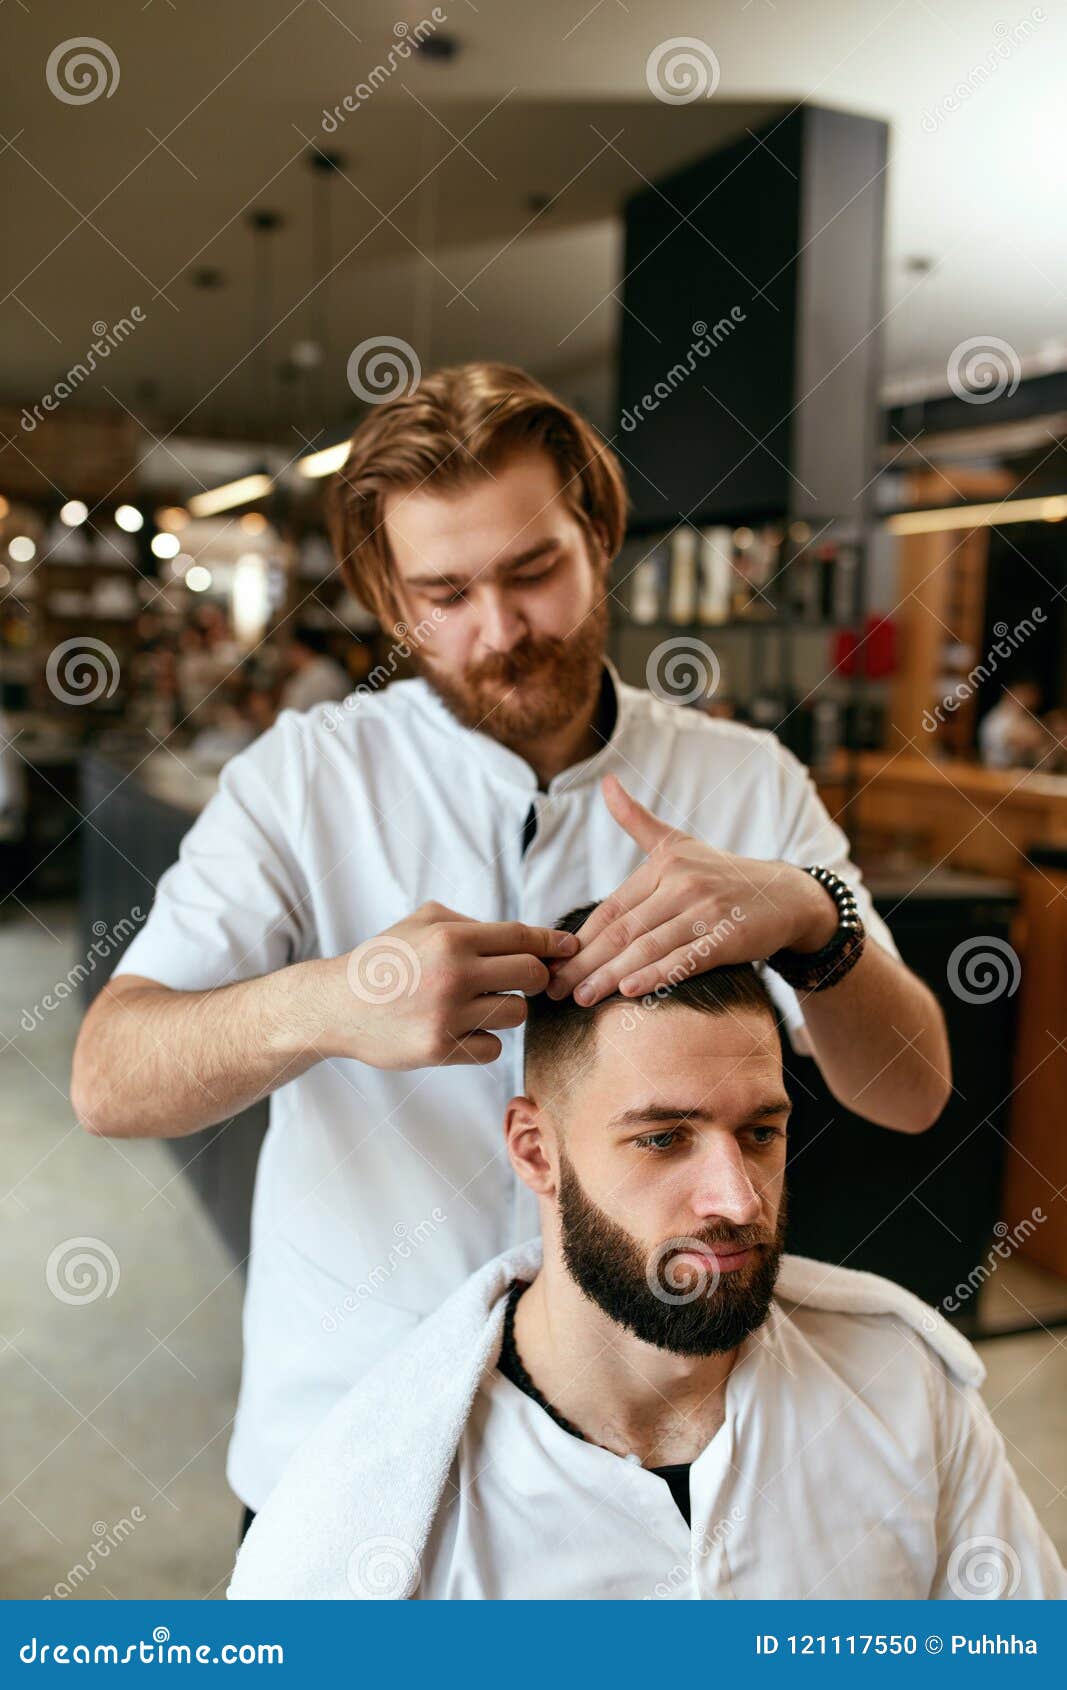 Men Hair Salon. Man Barber Doing Hairstyle in Barbershop Stock Photo -  Image of hairstylist, handsome: 121117550